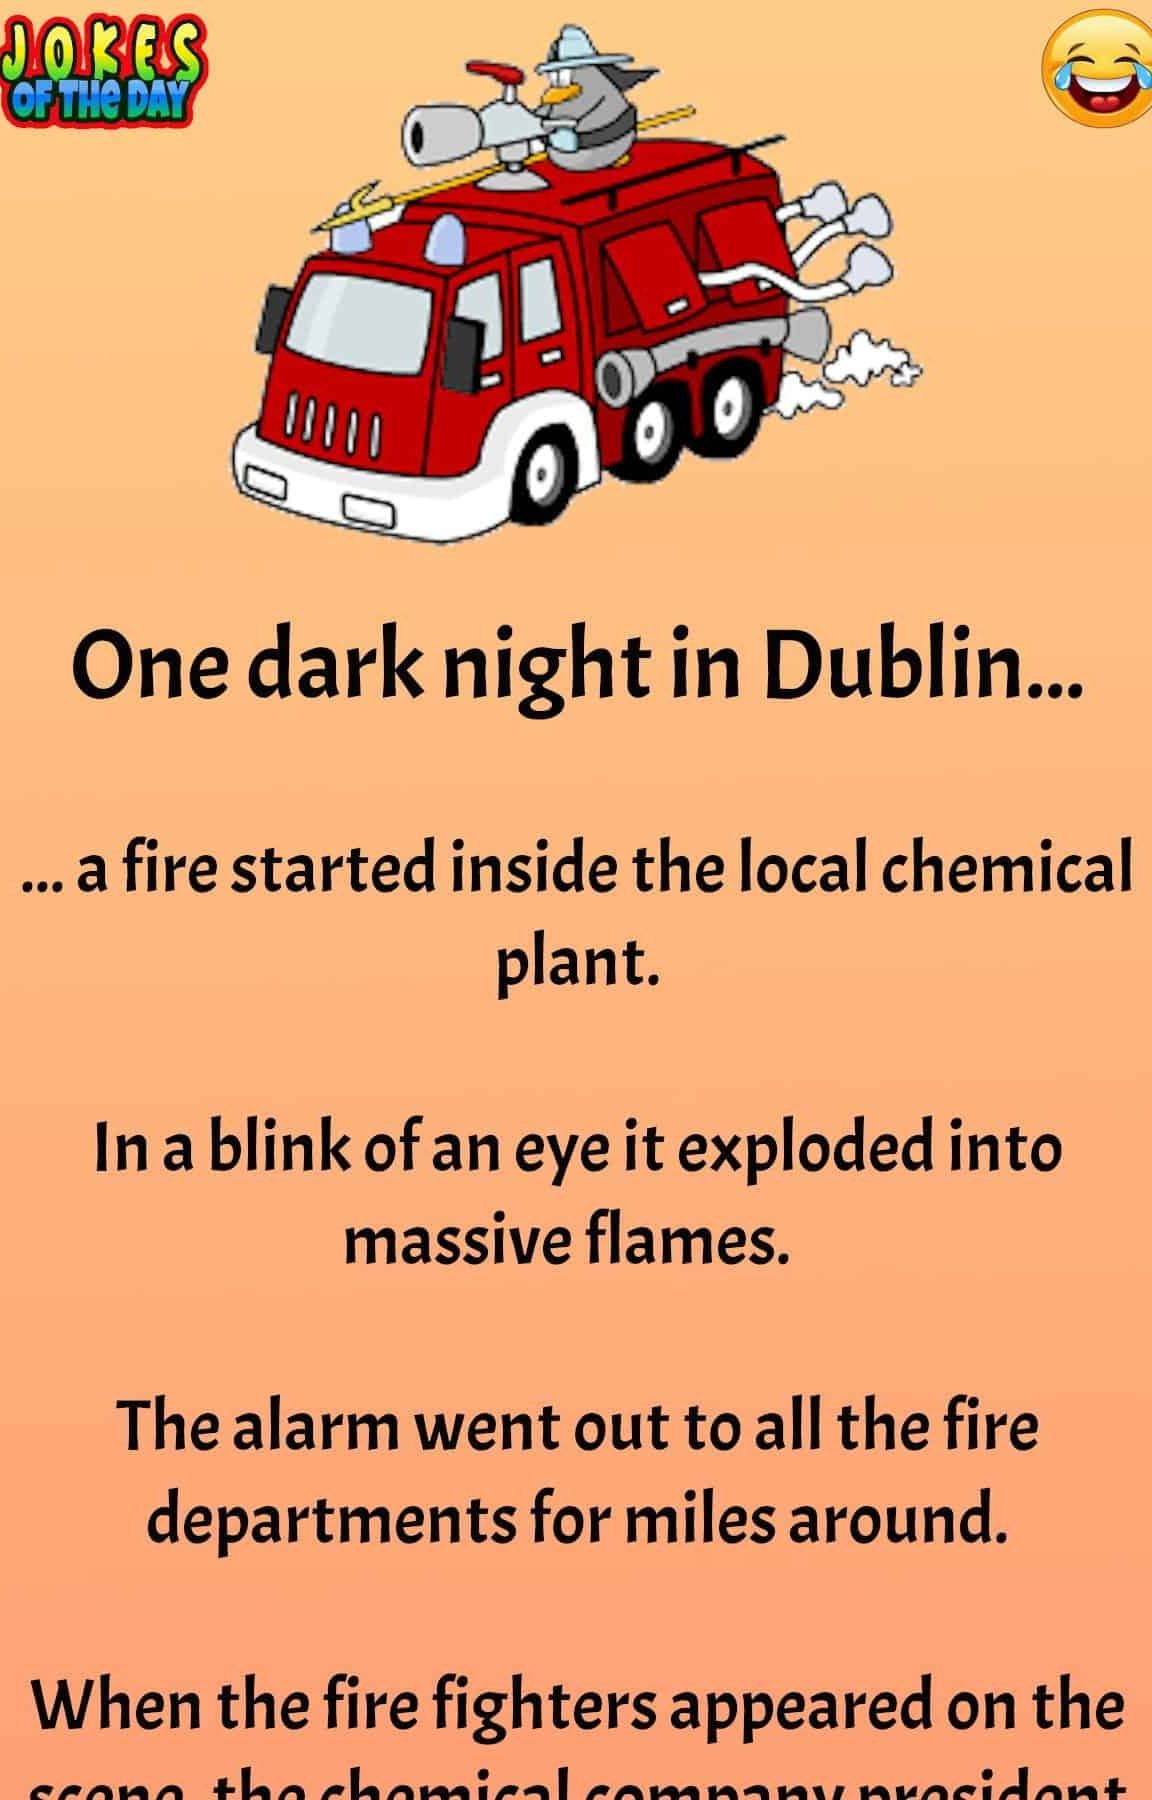 Clean Joke - One dark night in Dublin a fire started inside the local chemical plant  ‣ Jokes Of The Day 